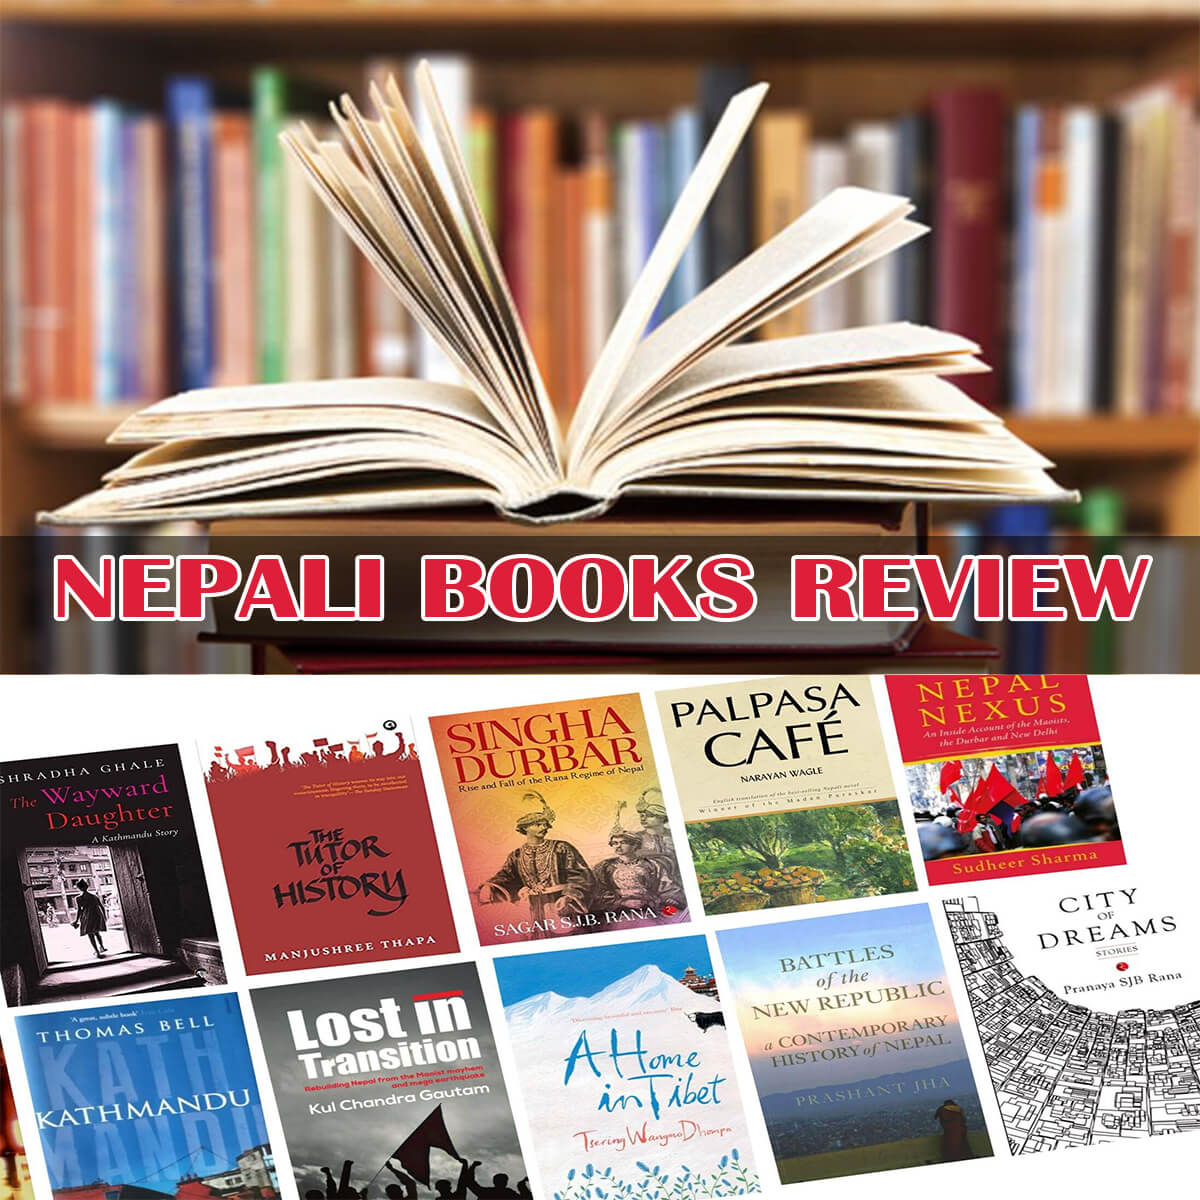 NEPALI BOOK REVIEW